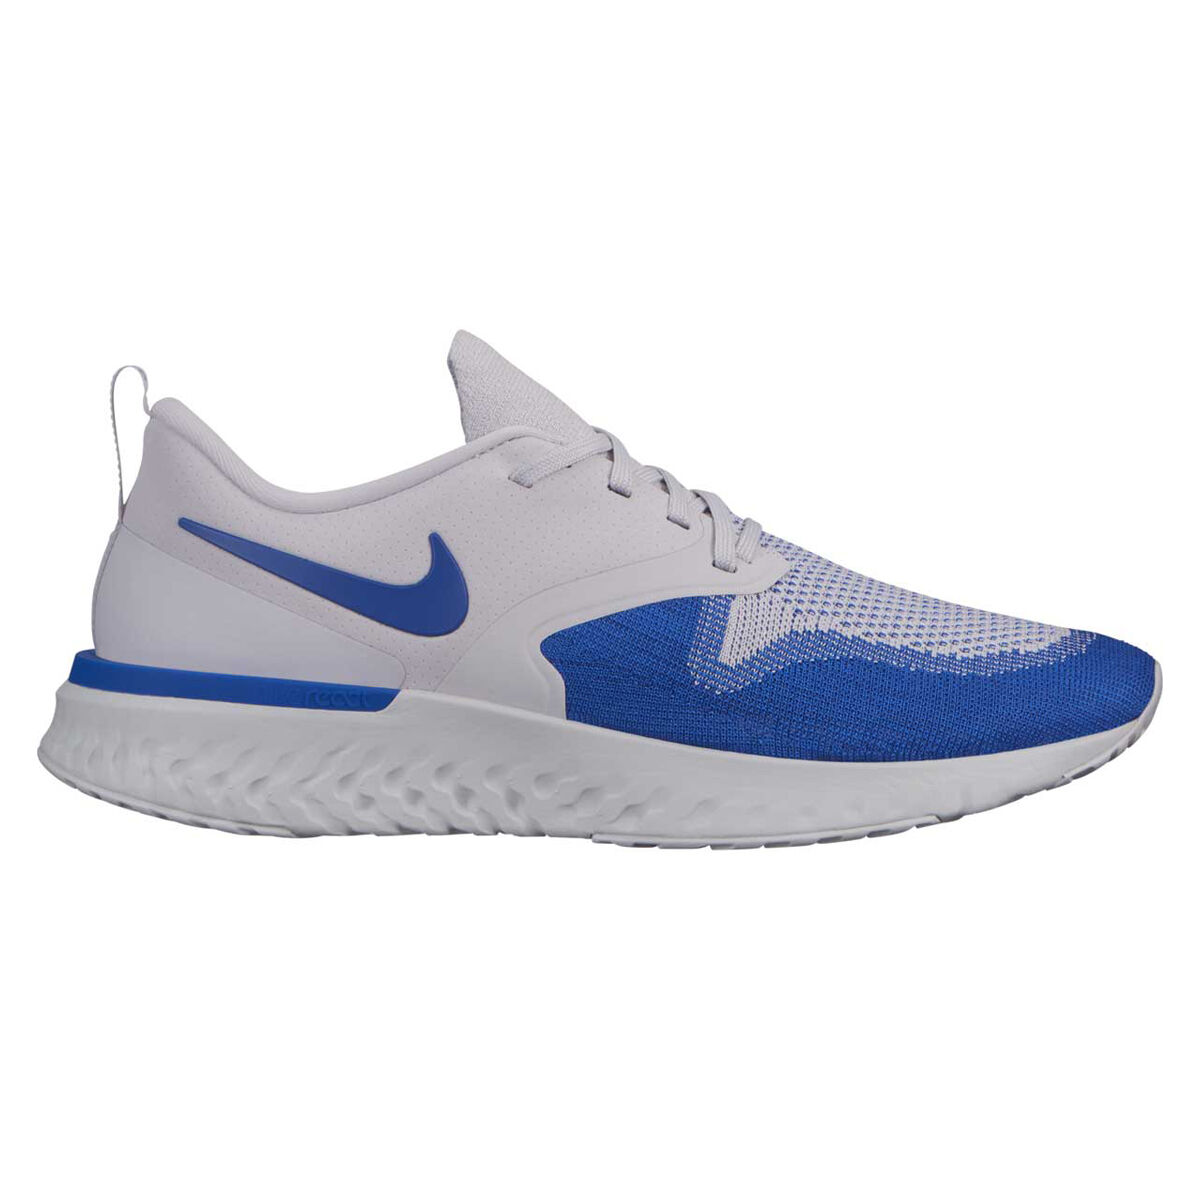 nike odyssey react 2 mens running shoes